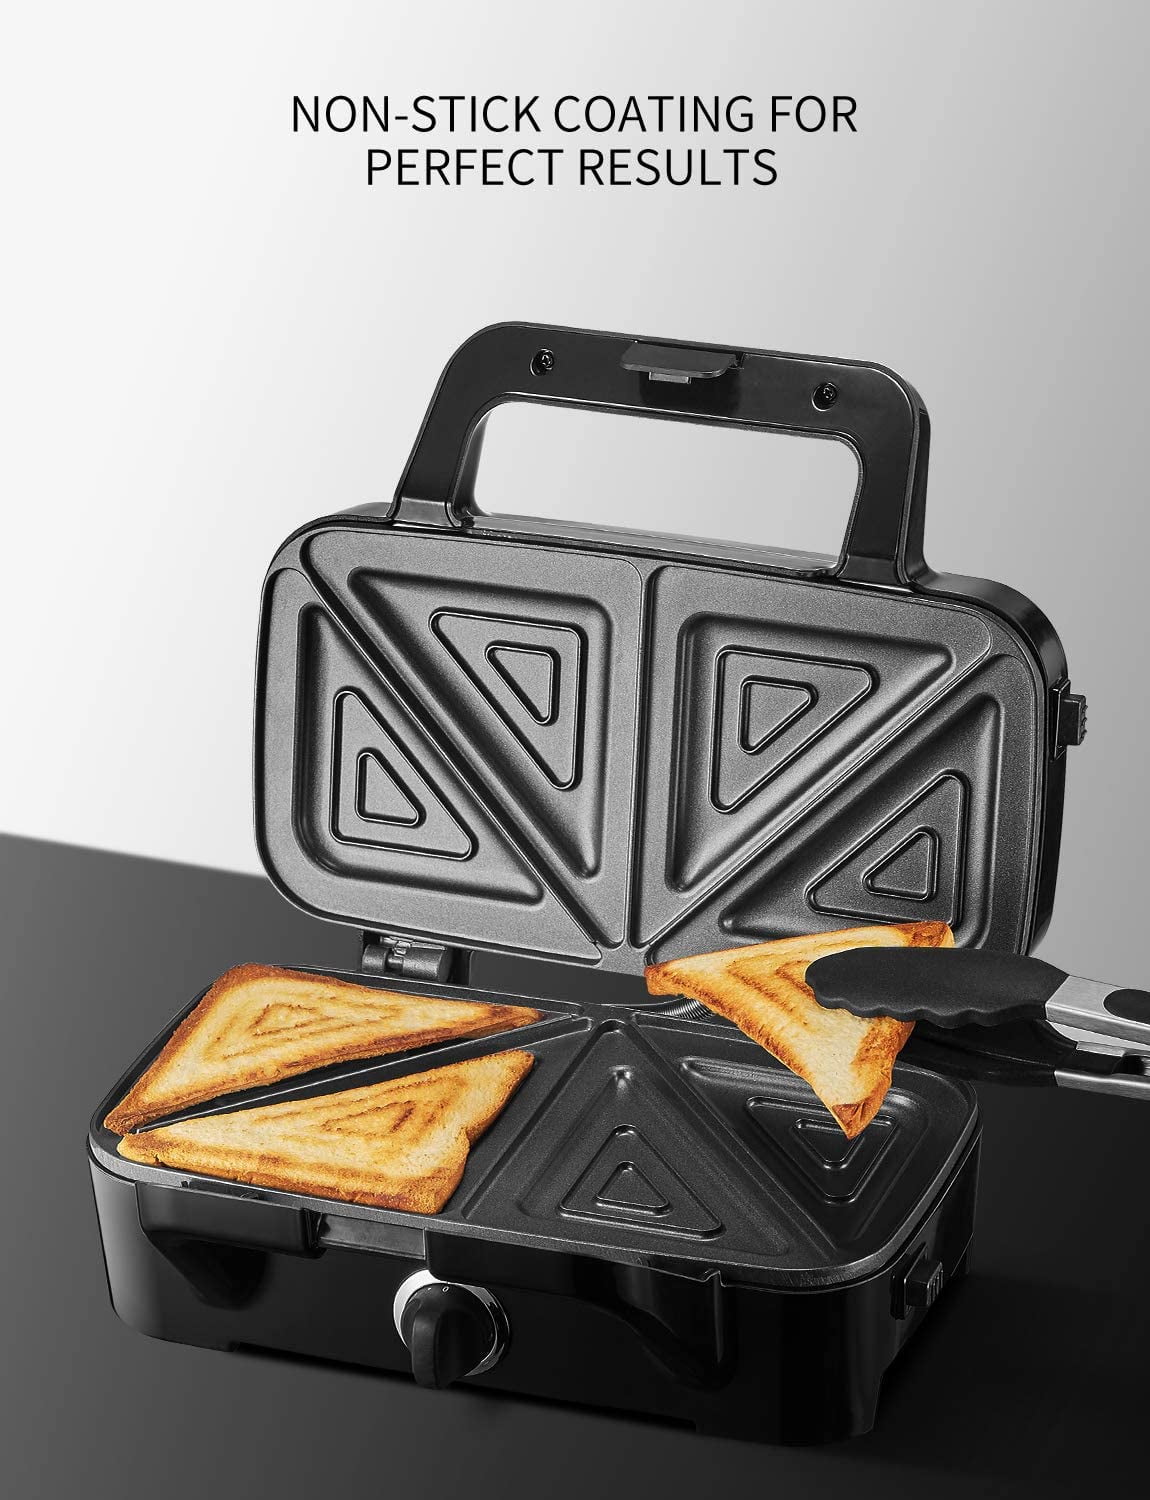 3 in 1 Detachable Sandwich Maker / Toaster, Waffle Maker & Grill  It is a Sandwich  Toaster/Sandwich Maker, Waffle Maker and a Grill at only Ksh.3,950 down from  Ksh.4,500. A 2